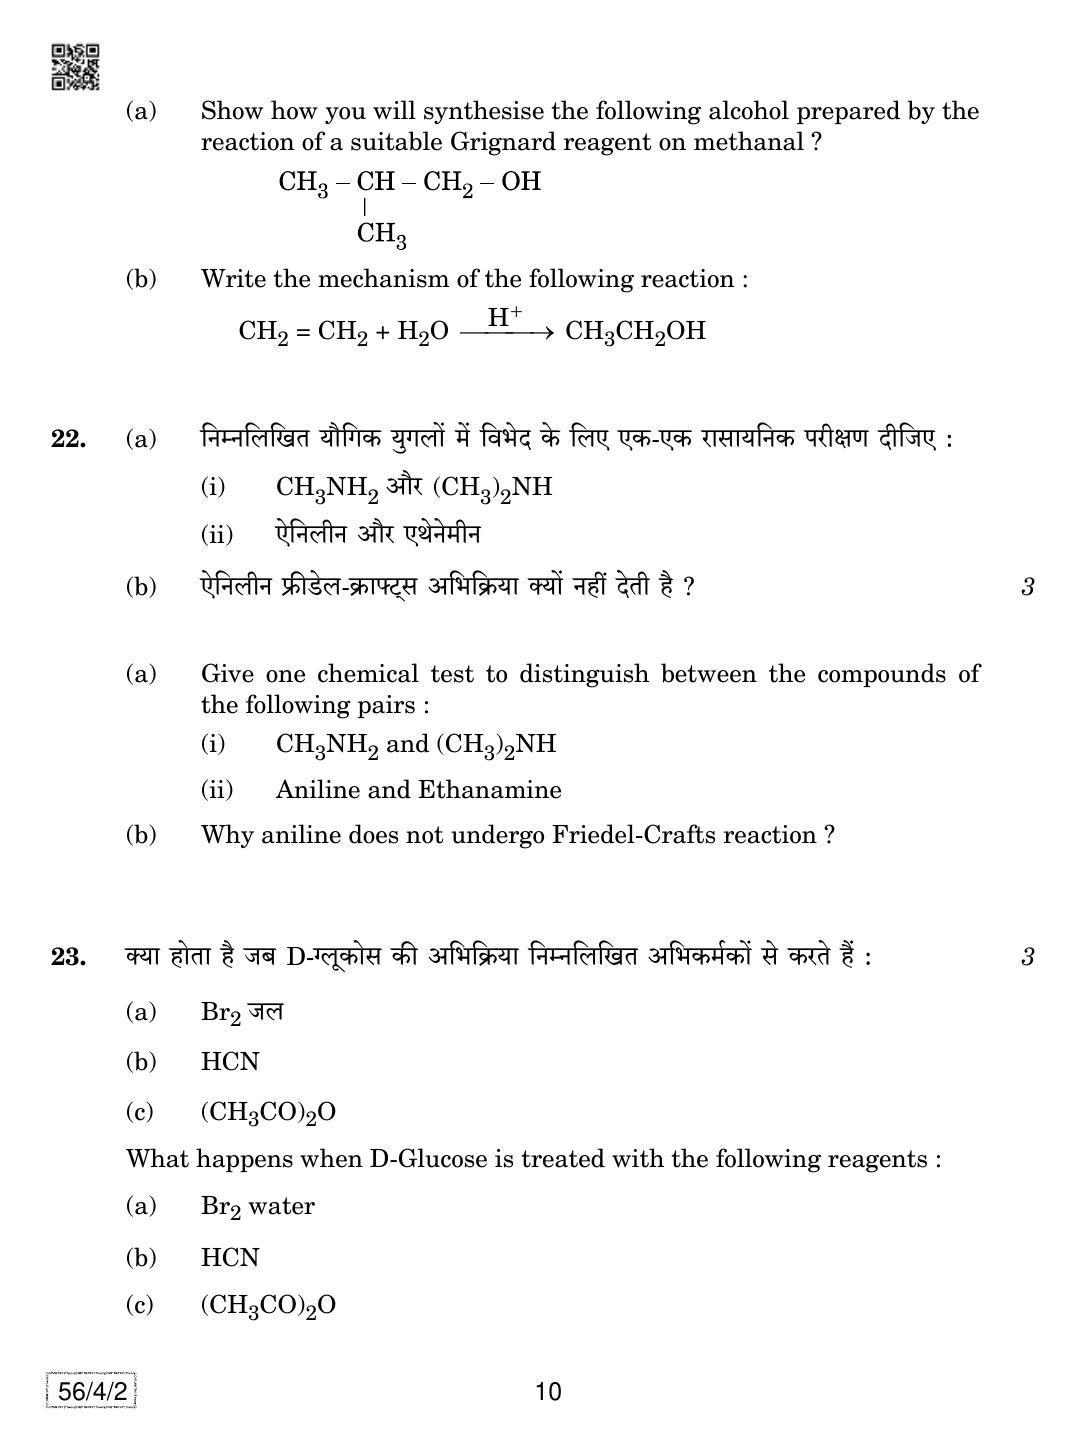 CBSE Class 12 56-4-2 Chemistry 2019 Question Paper - Page 10